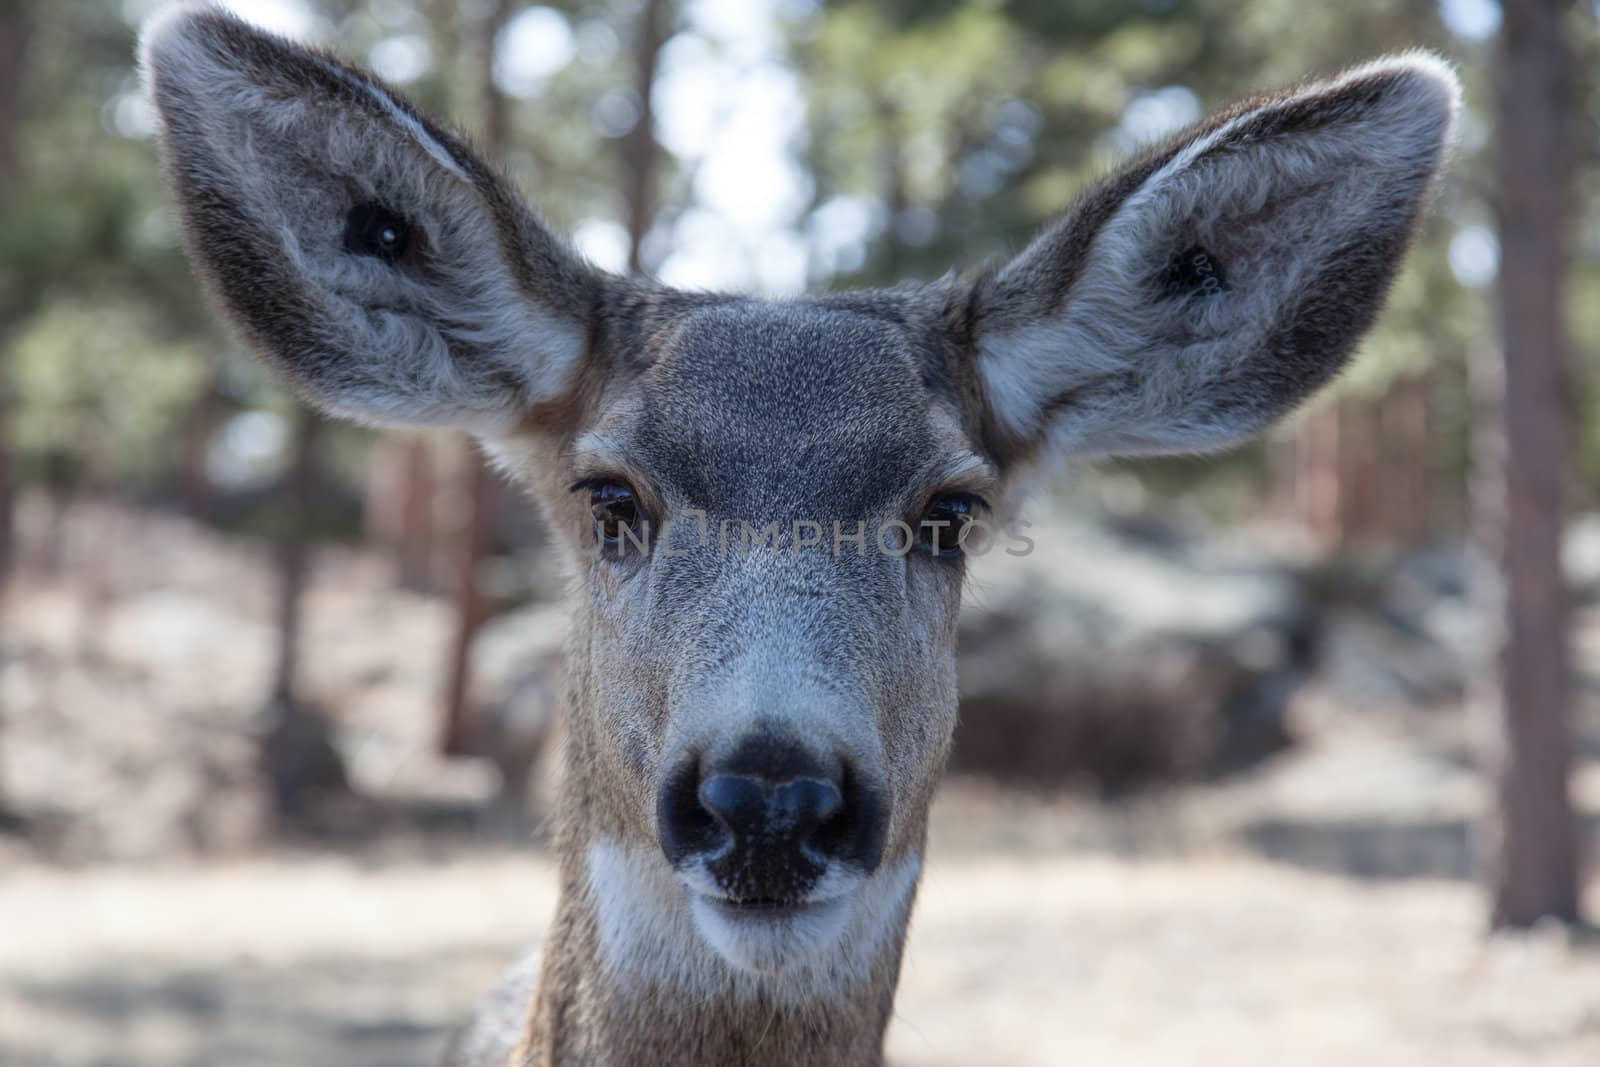 A deer poses for a up close portrait.